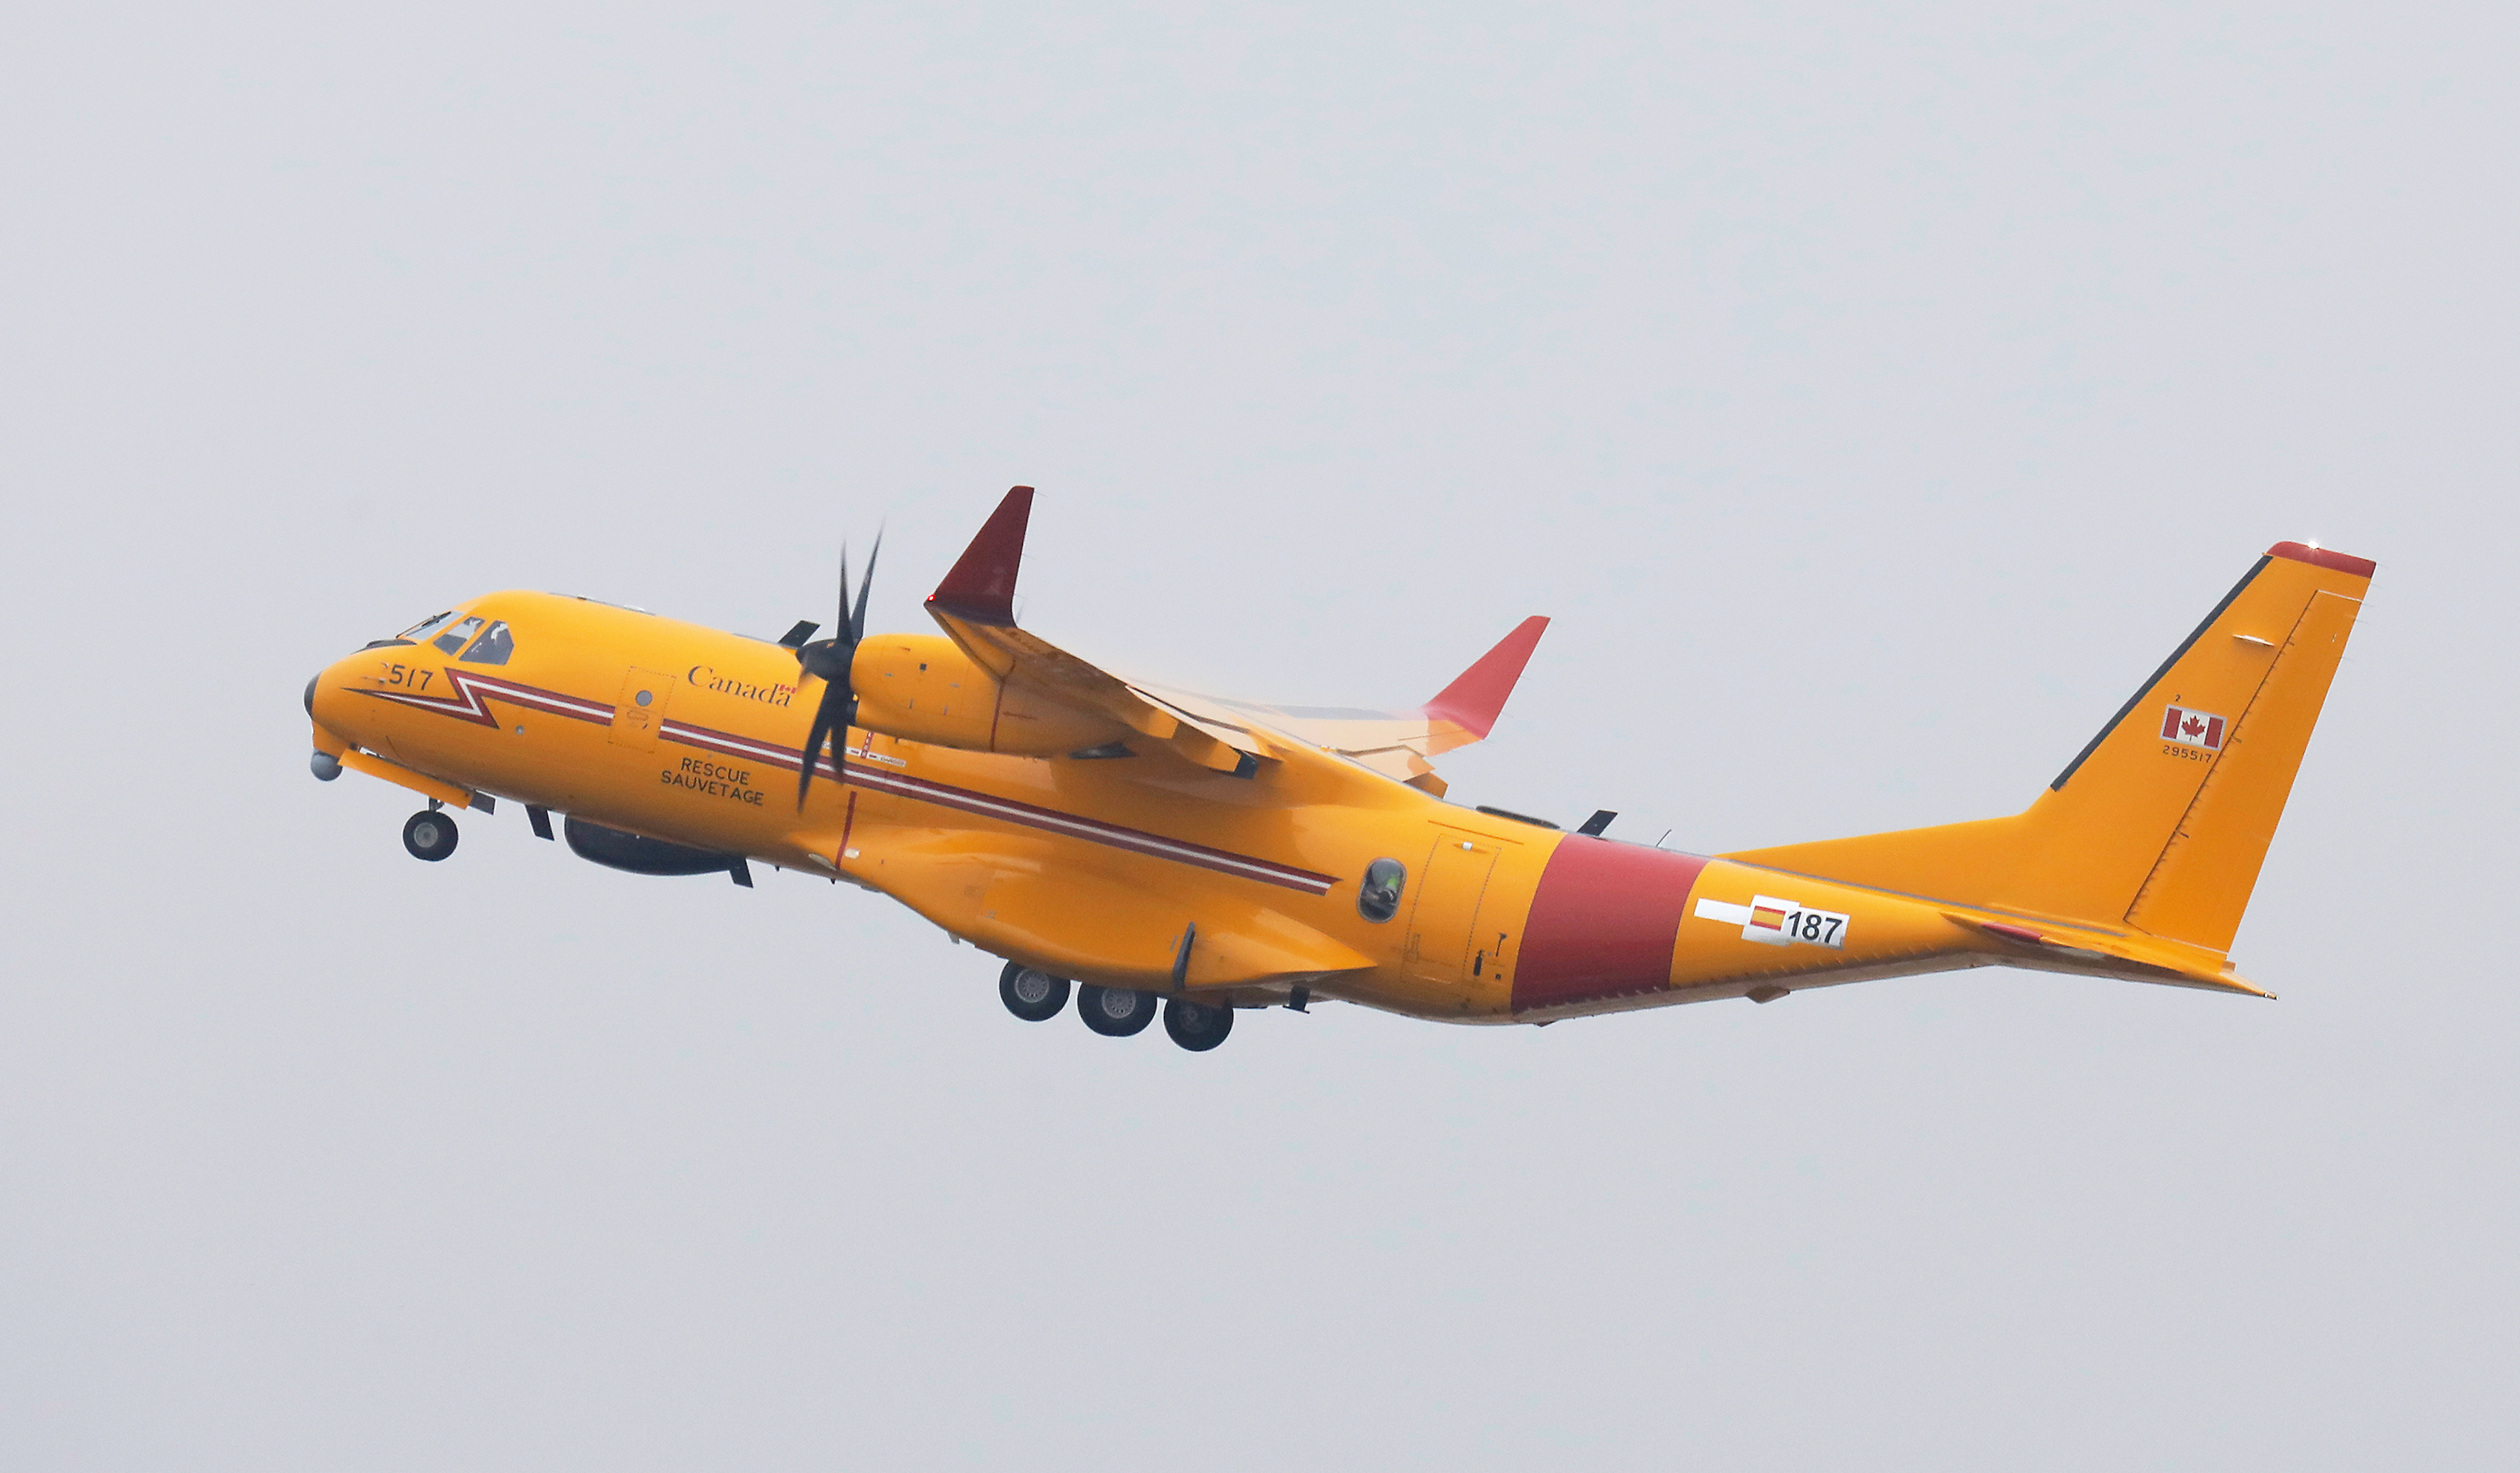 An orange aircraft with red markings ascends in a grey sky.